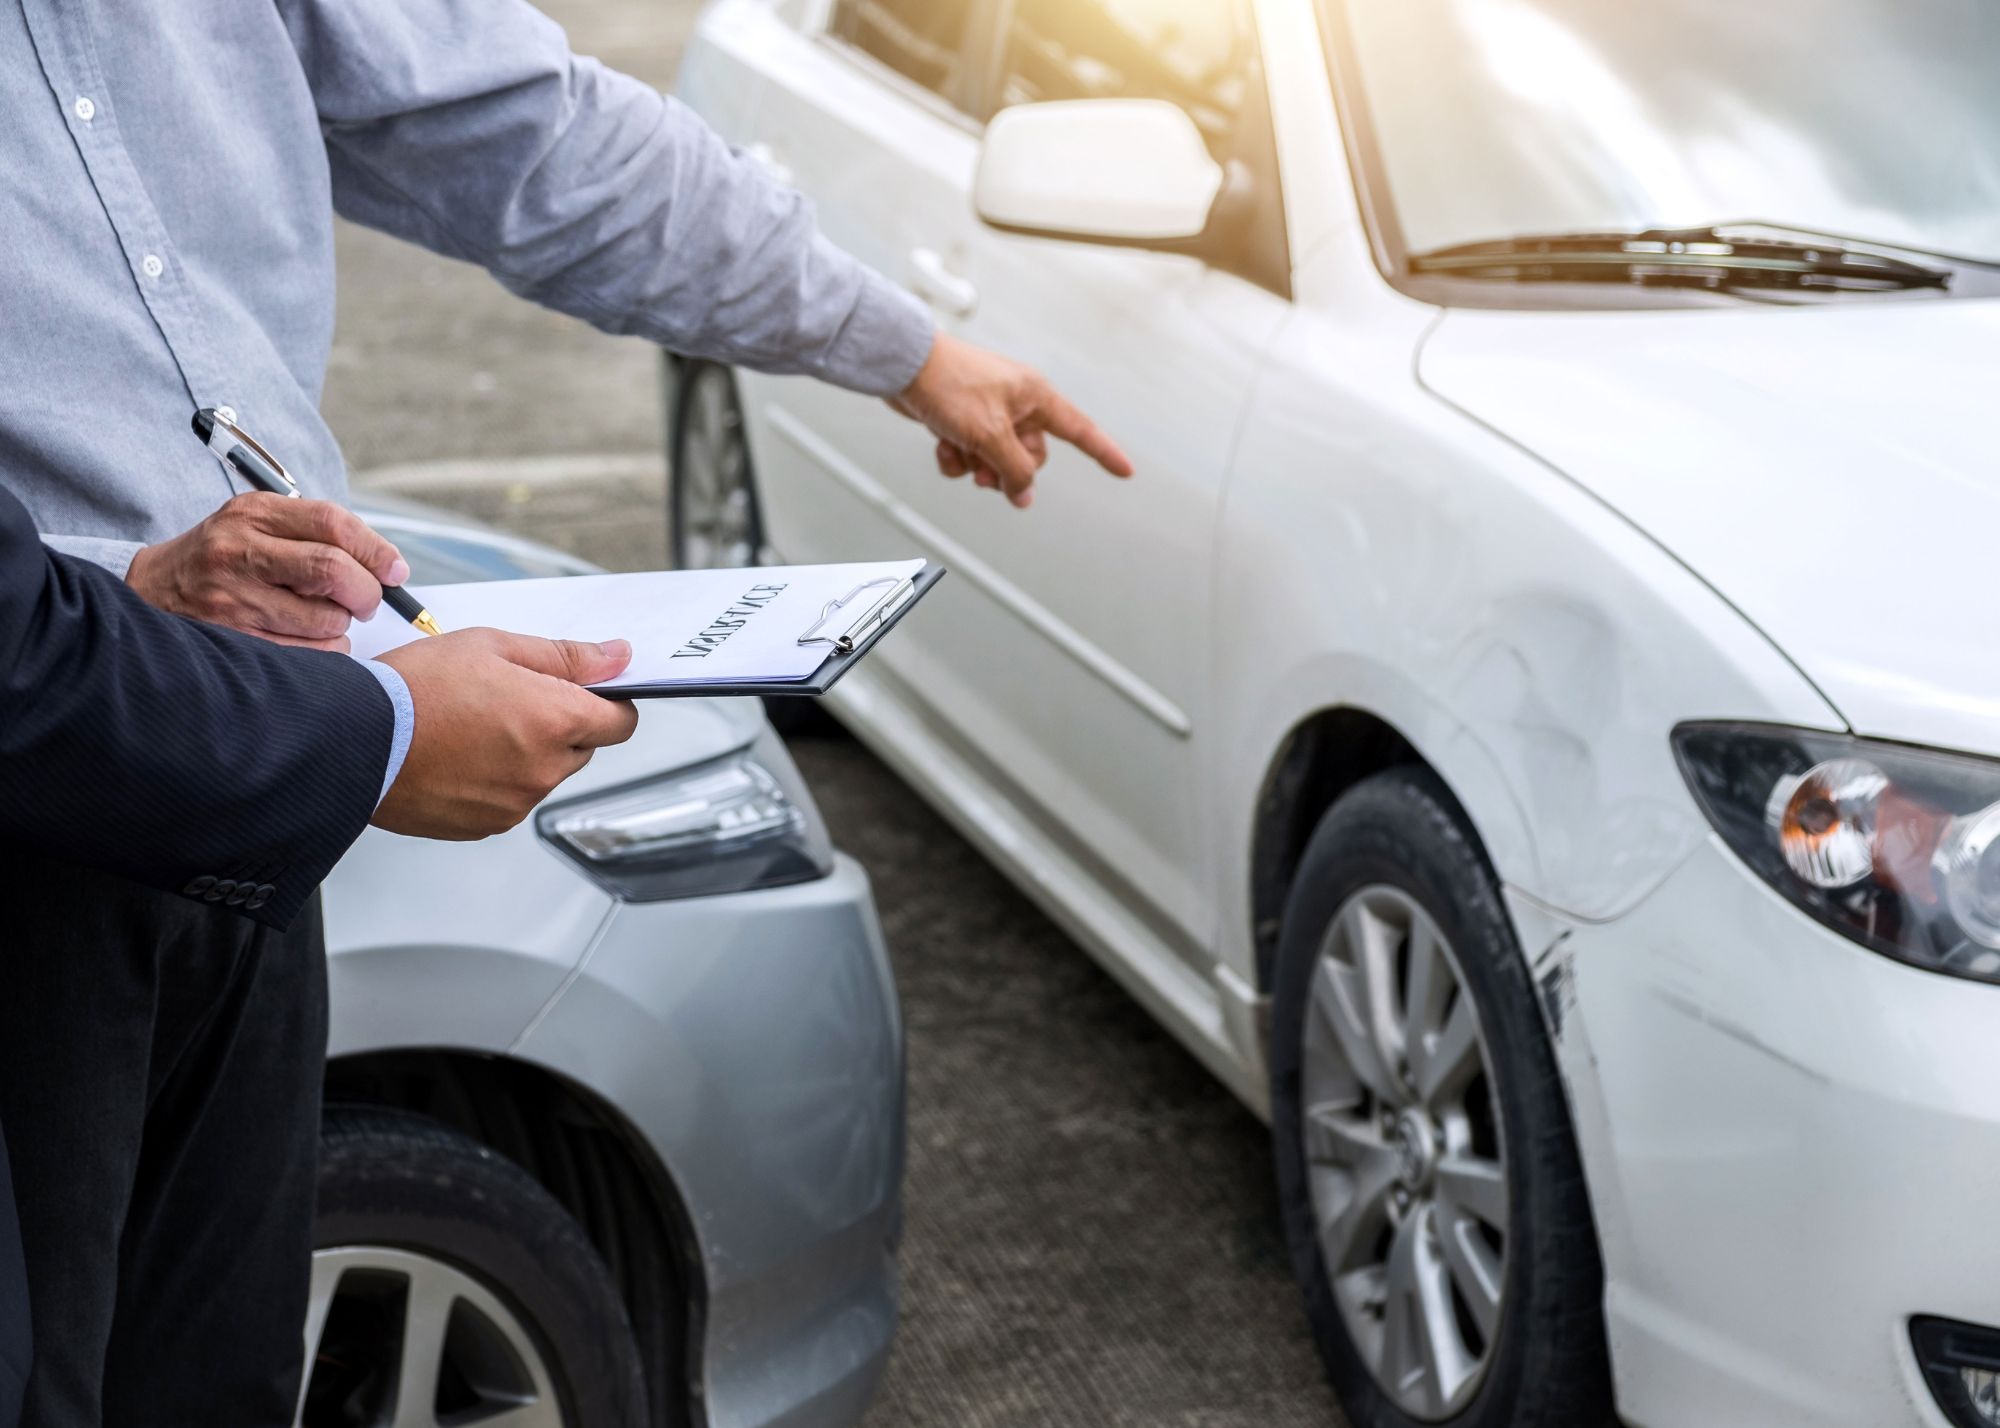 SR22 state car coverage is a type of auto insurance required for high-risk drivers in order to maintain their driving privileges. It is commonly used in Portland, ME to fulfill legal requirements.